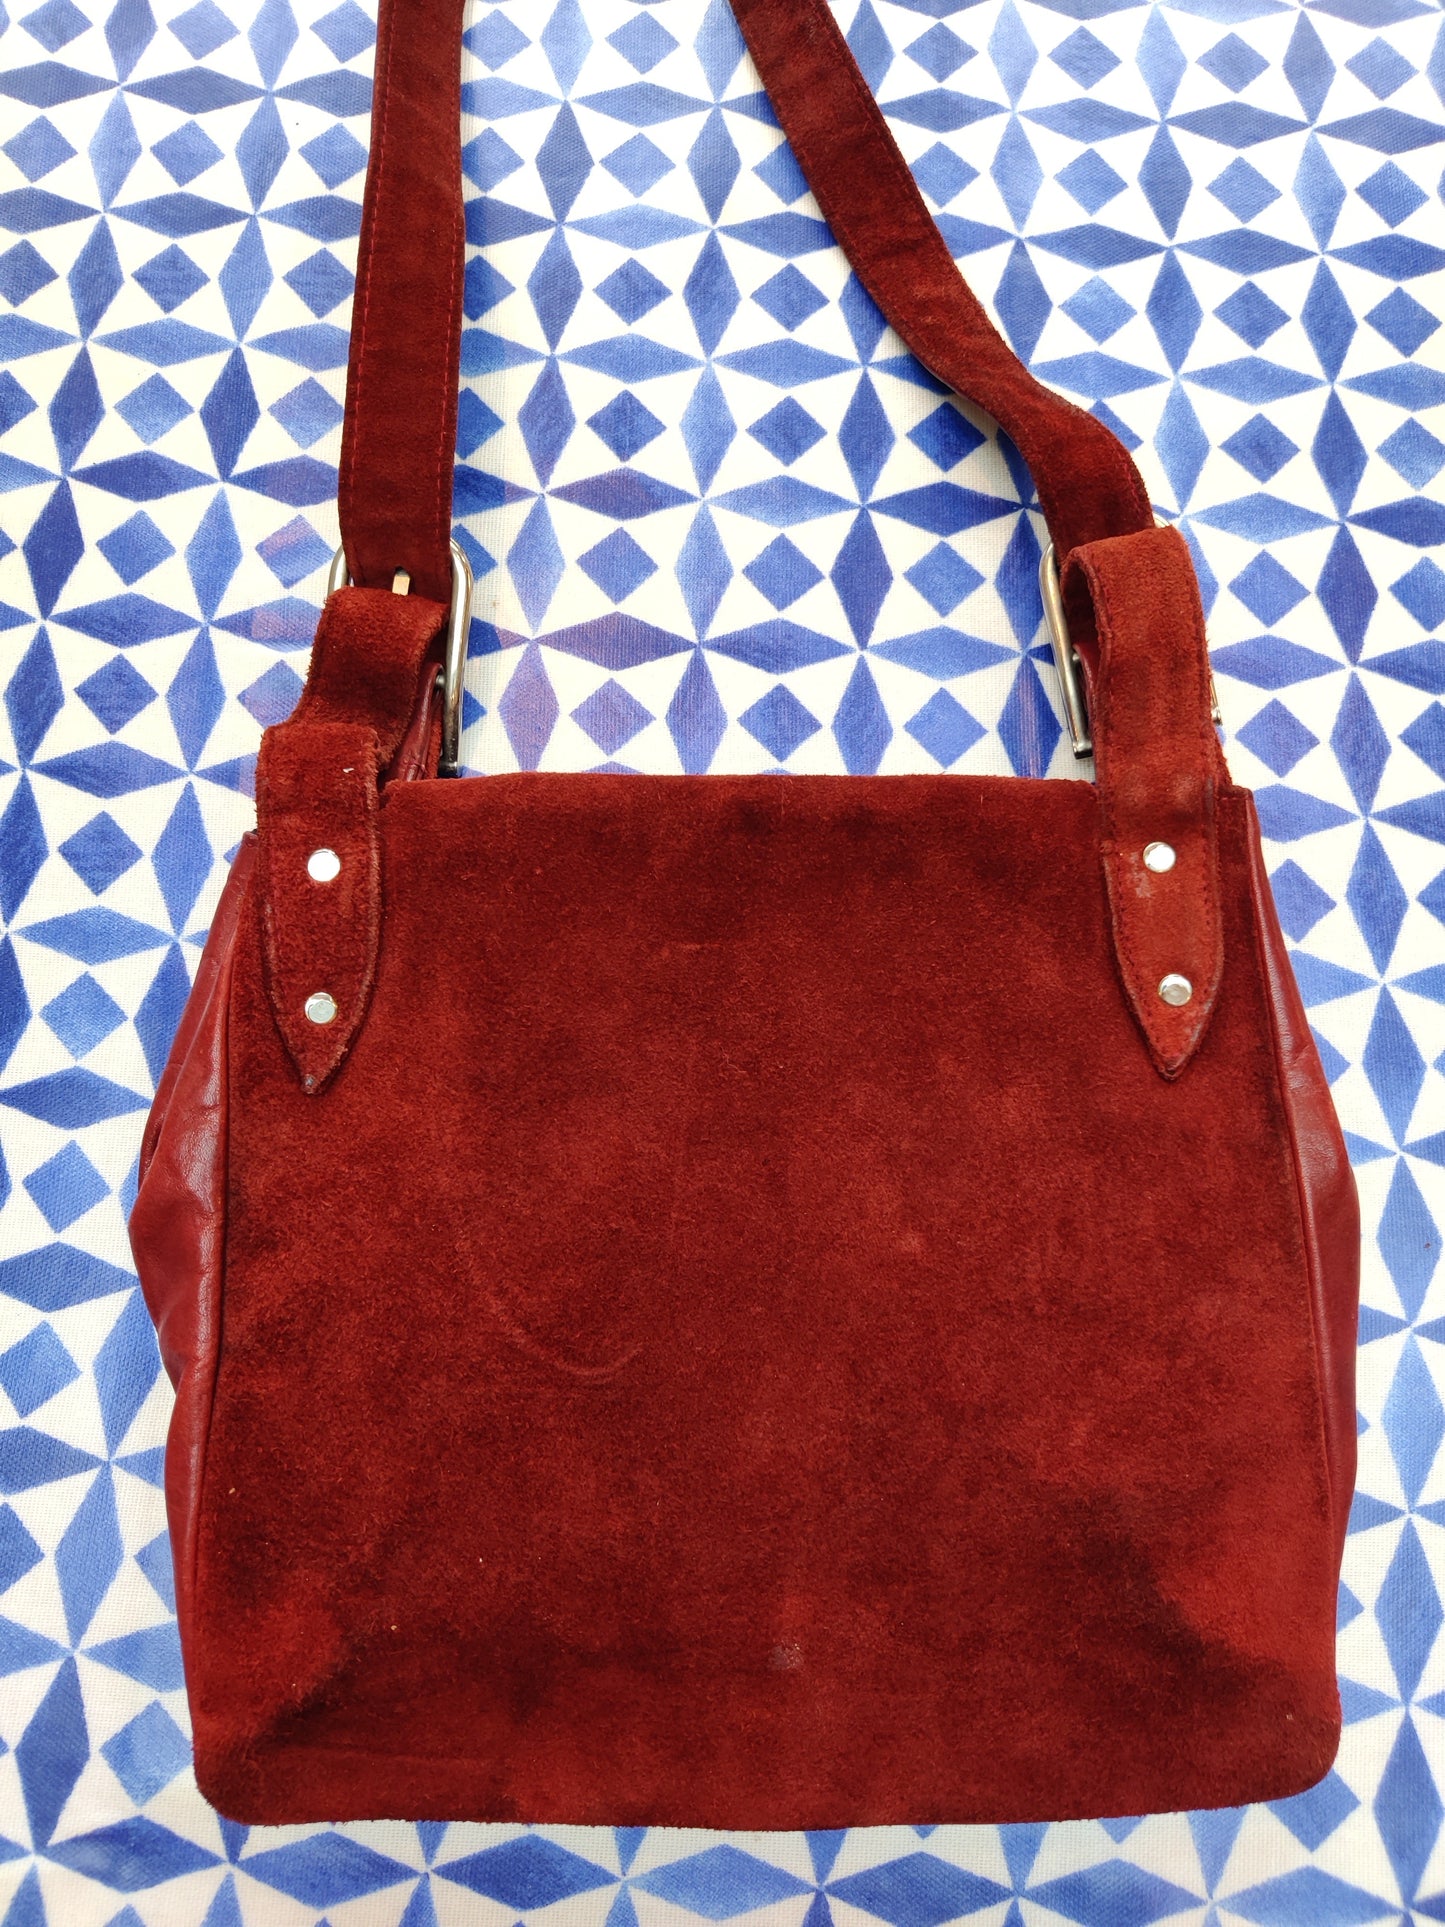 Lovely red suede shoulder bag with gold detail